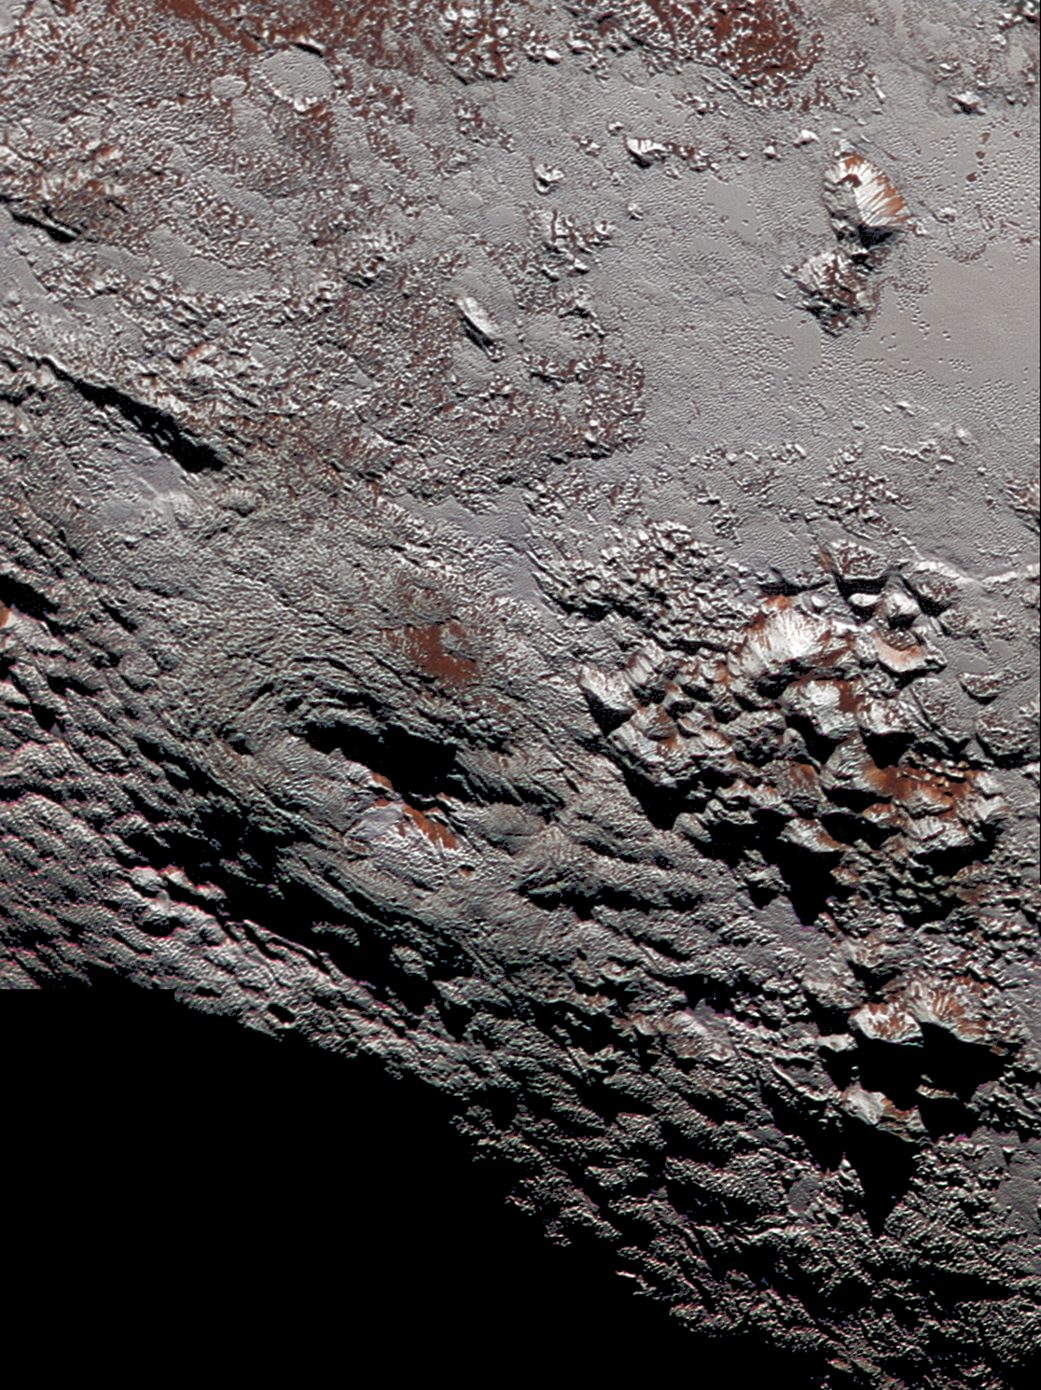 highest-resolution color view of one of two potential cryovolcanoes spotted on the surface of Pluto by the New Horizons